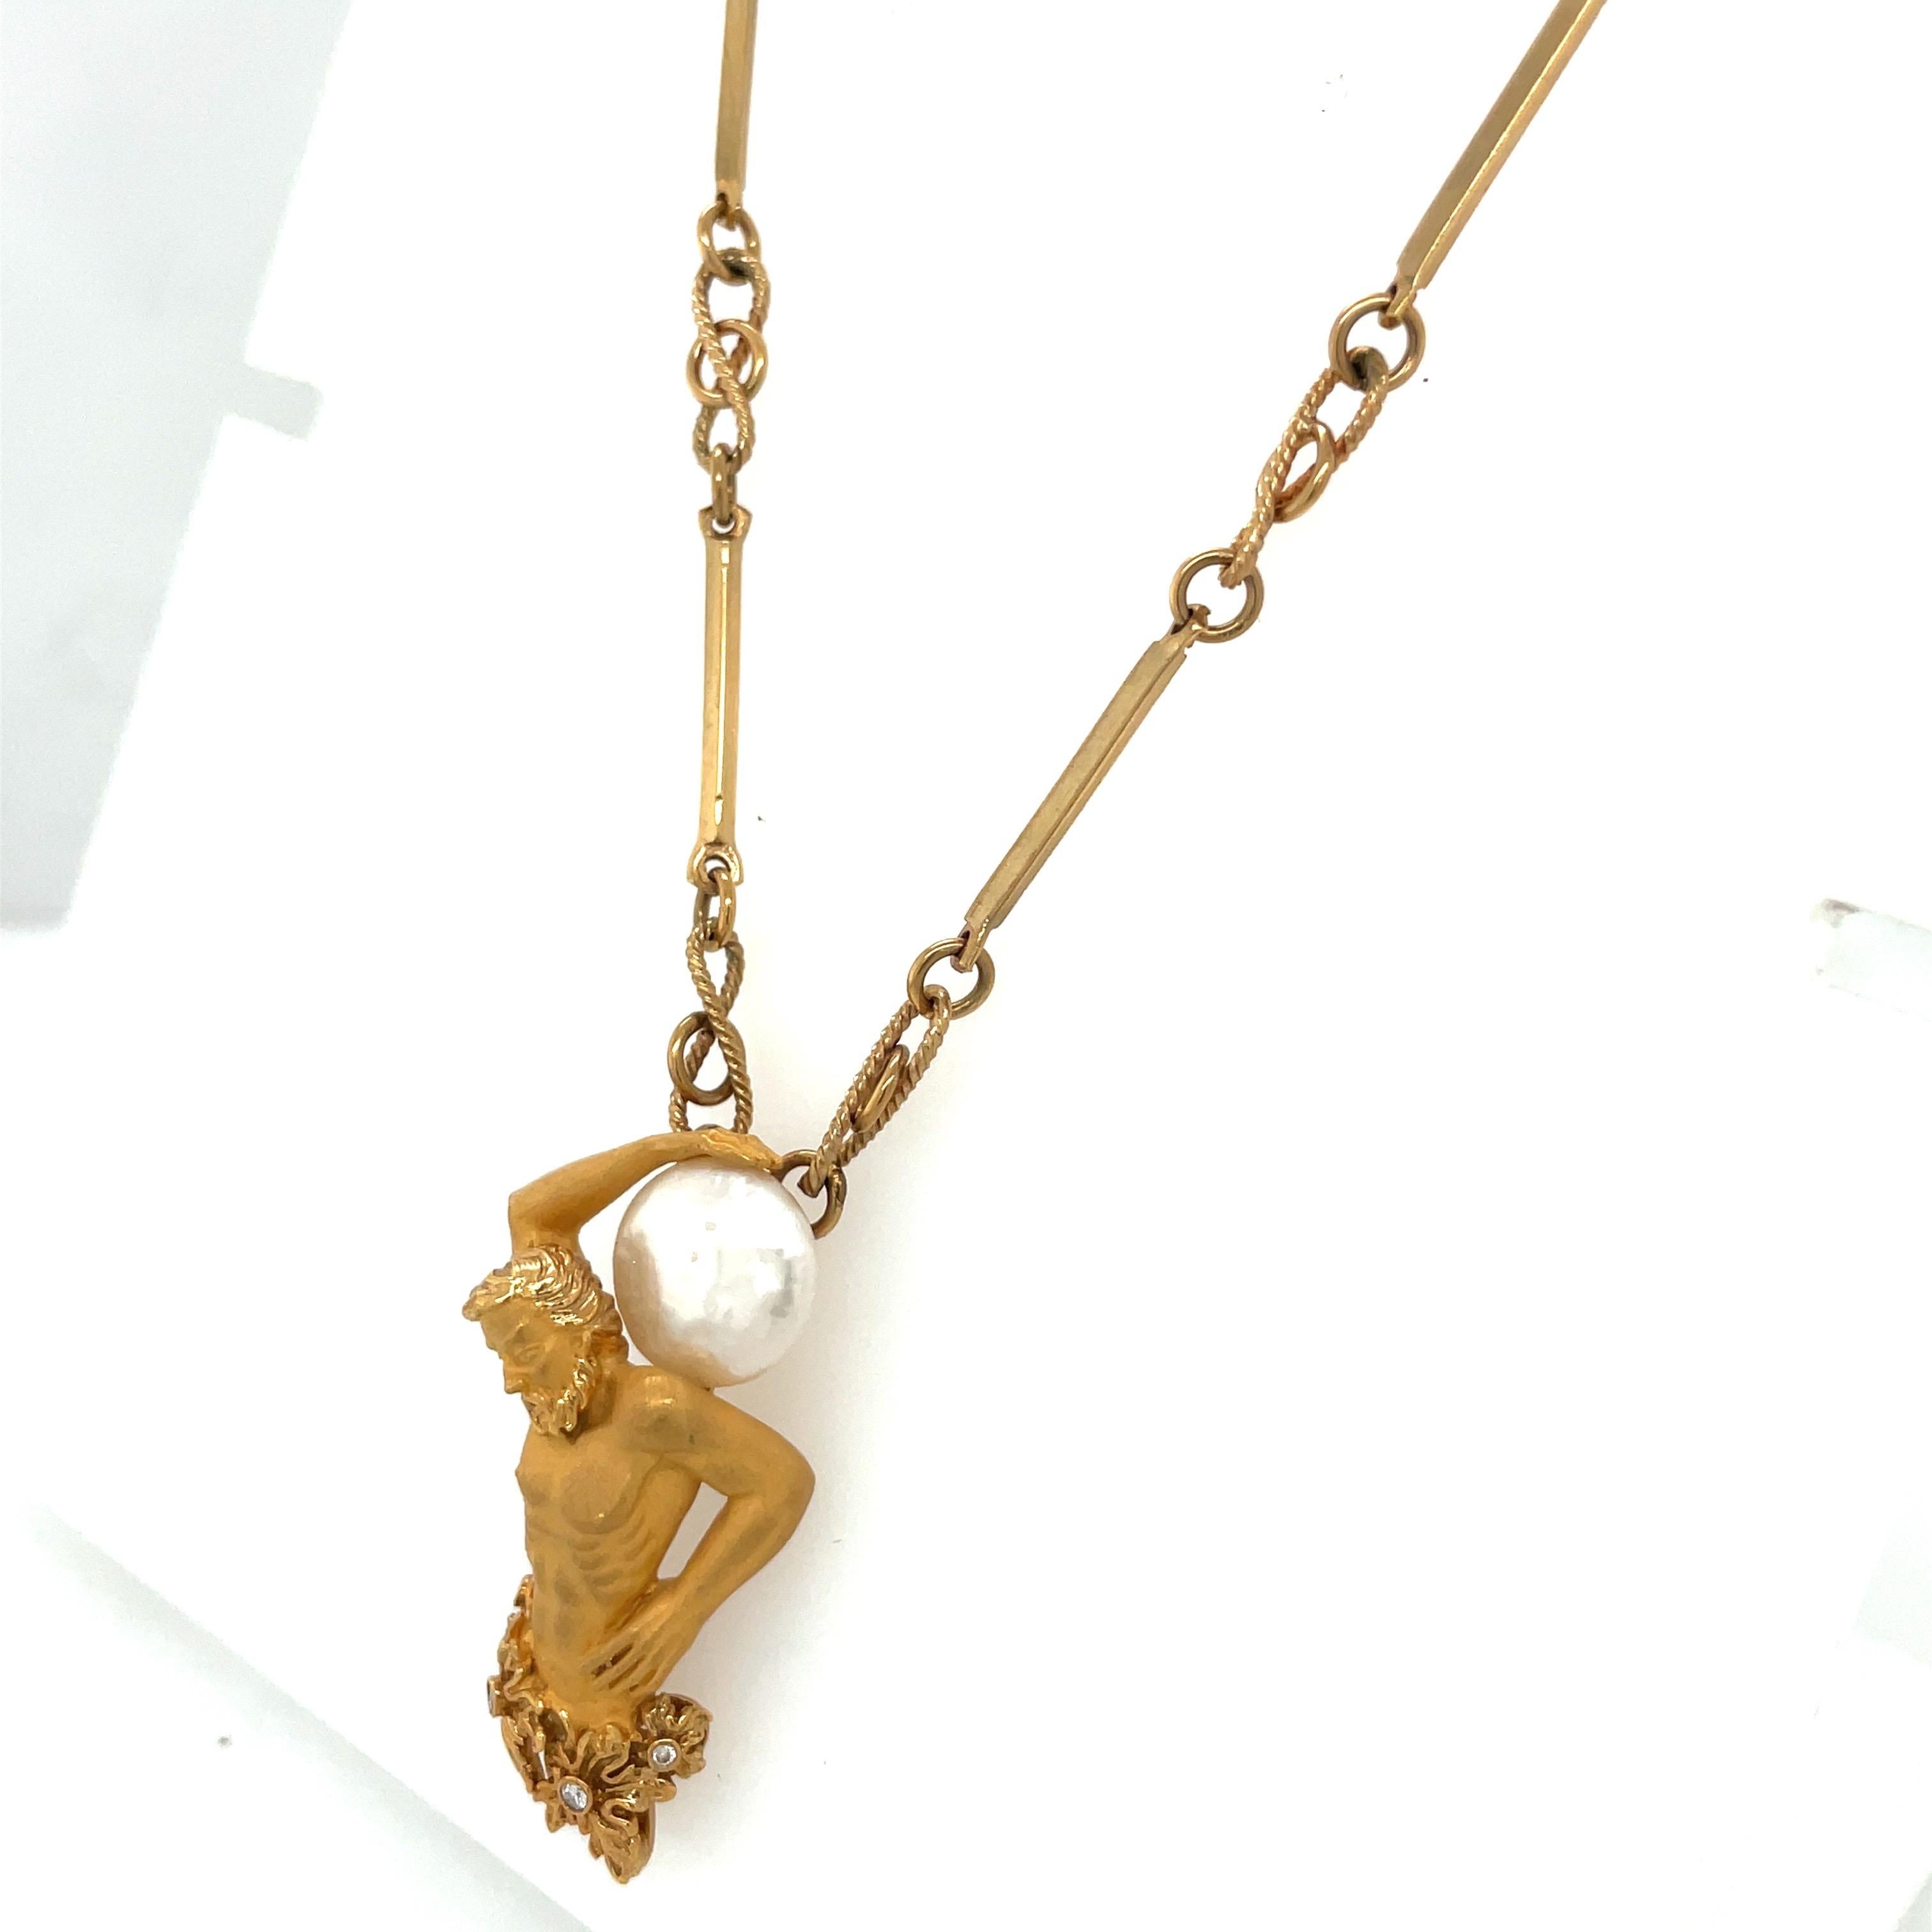 This 18 karat yellow gold pendant by Carrera Y Carrera of Spain depicts a beautifully detailed Atlas, the Titan who was responsible for bearing the weight of the heavens on his shoulders. He is crafted in a sandblasted 18 karat yellow gold finish.